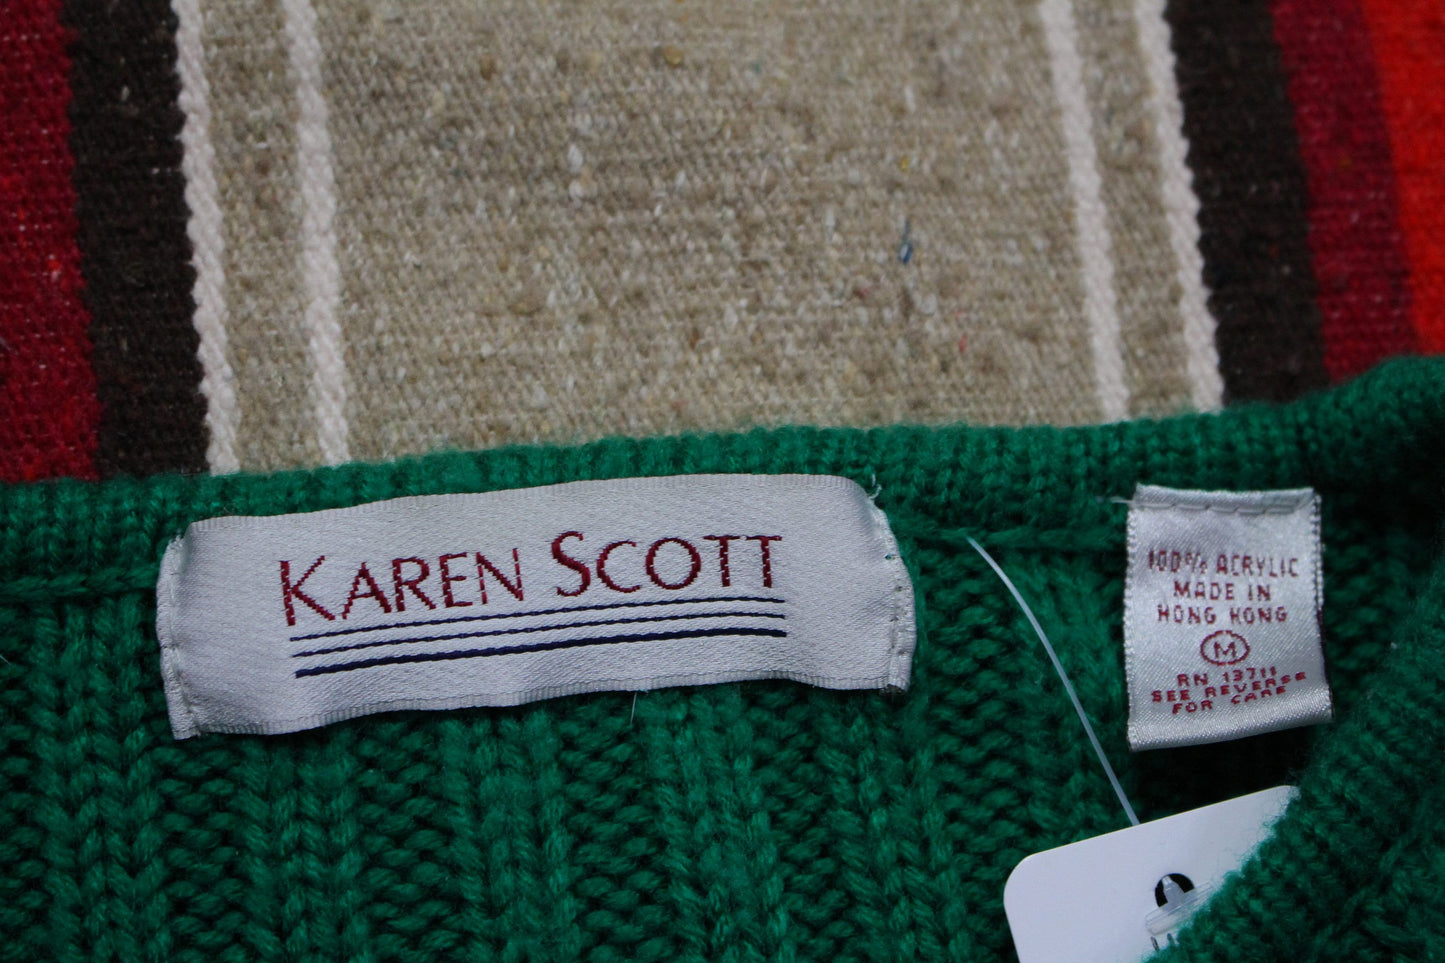 1980s/1990s Karen Scott Green Acrylic Cable Knit Sweater Size M/L